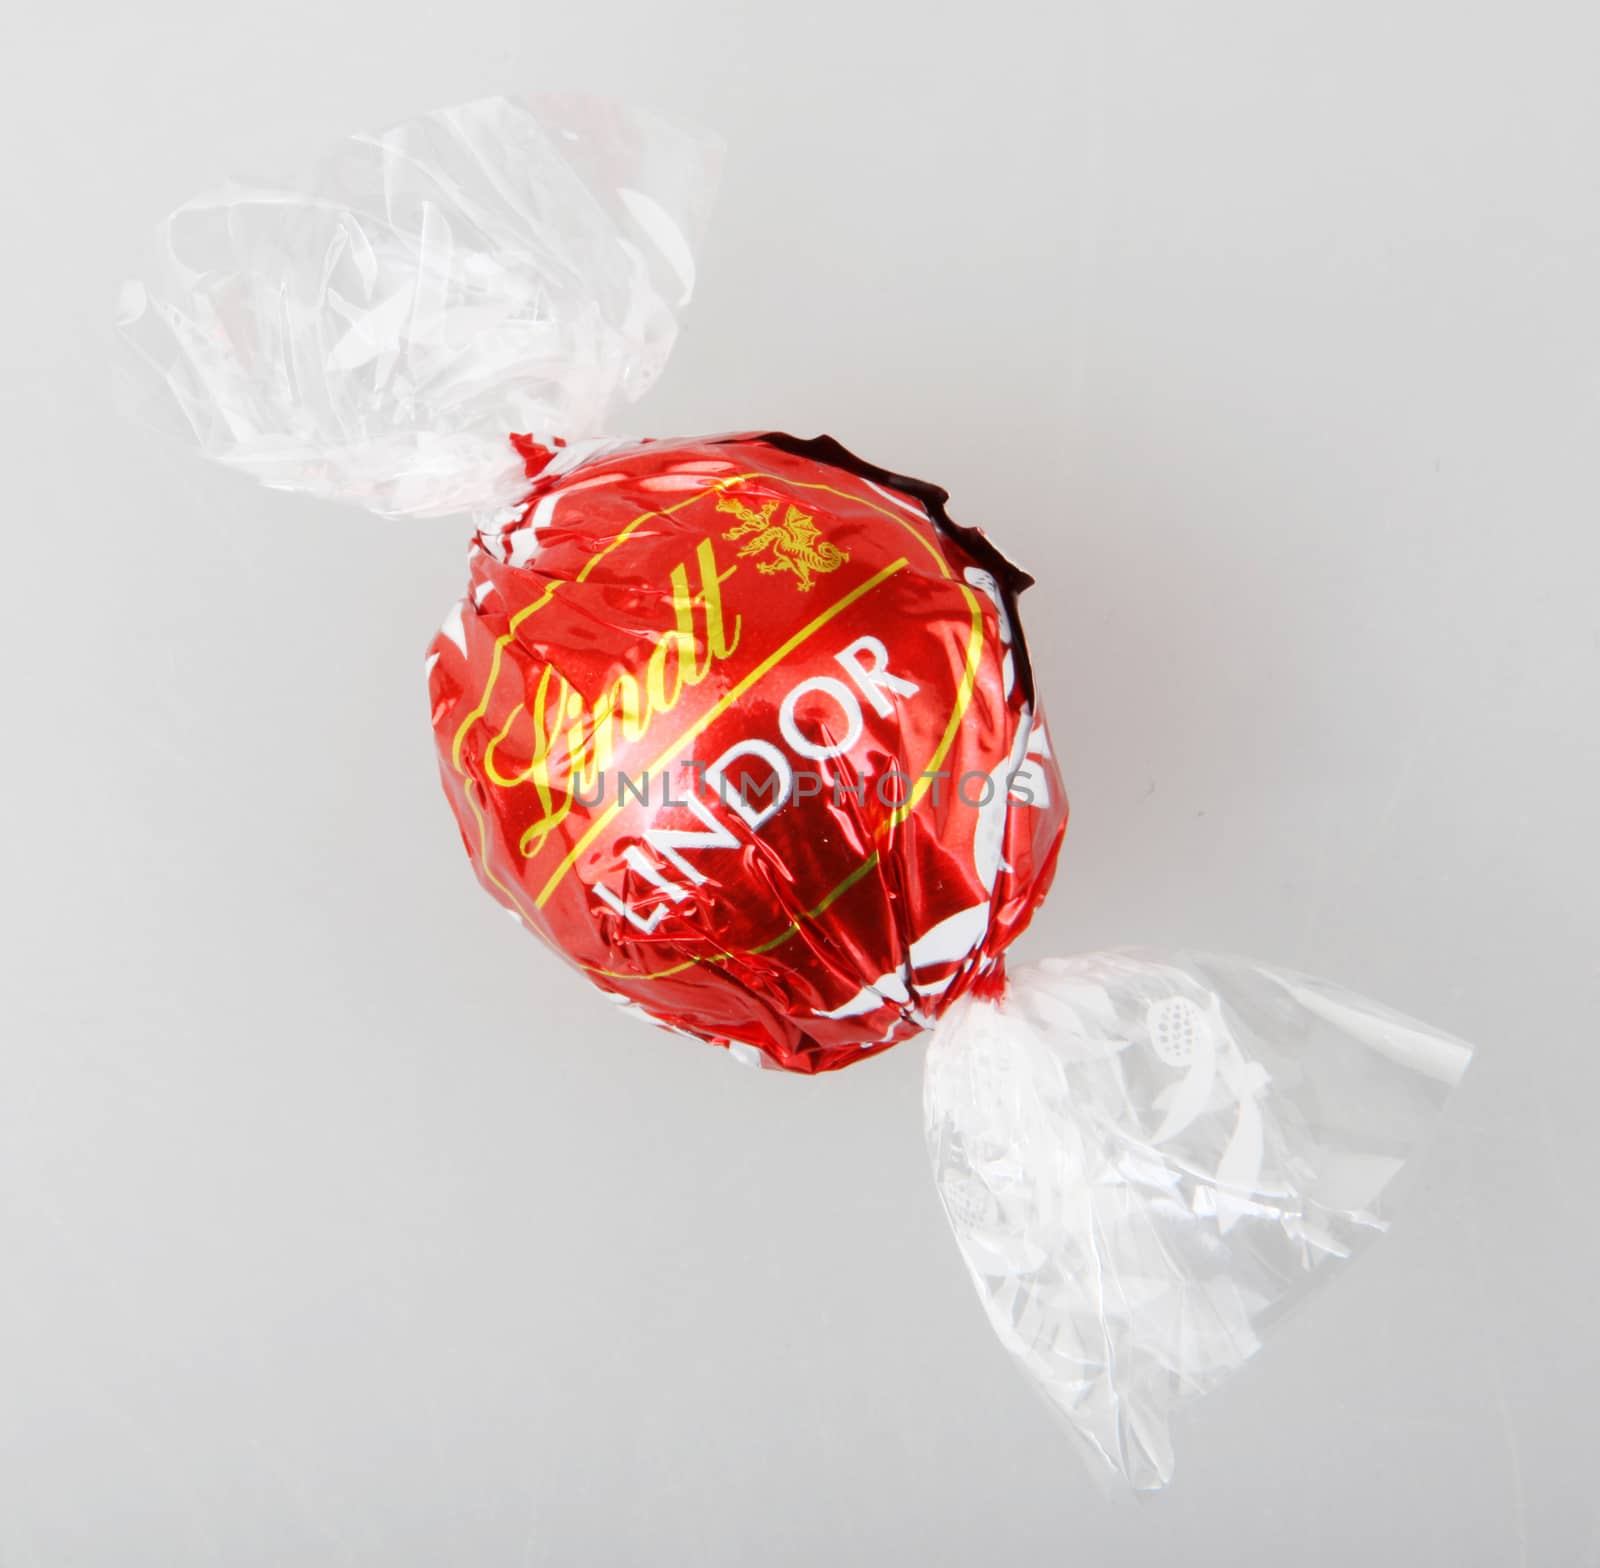 Pomorie, Bulgaria - May 16, 2019: Milk Chocolate Lindor Truffle. Lindt Is Recognized As A Leader In The Market For Premium Quality Chocolate. by nenovbrothers